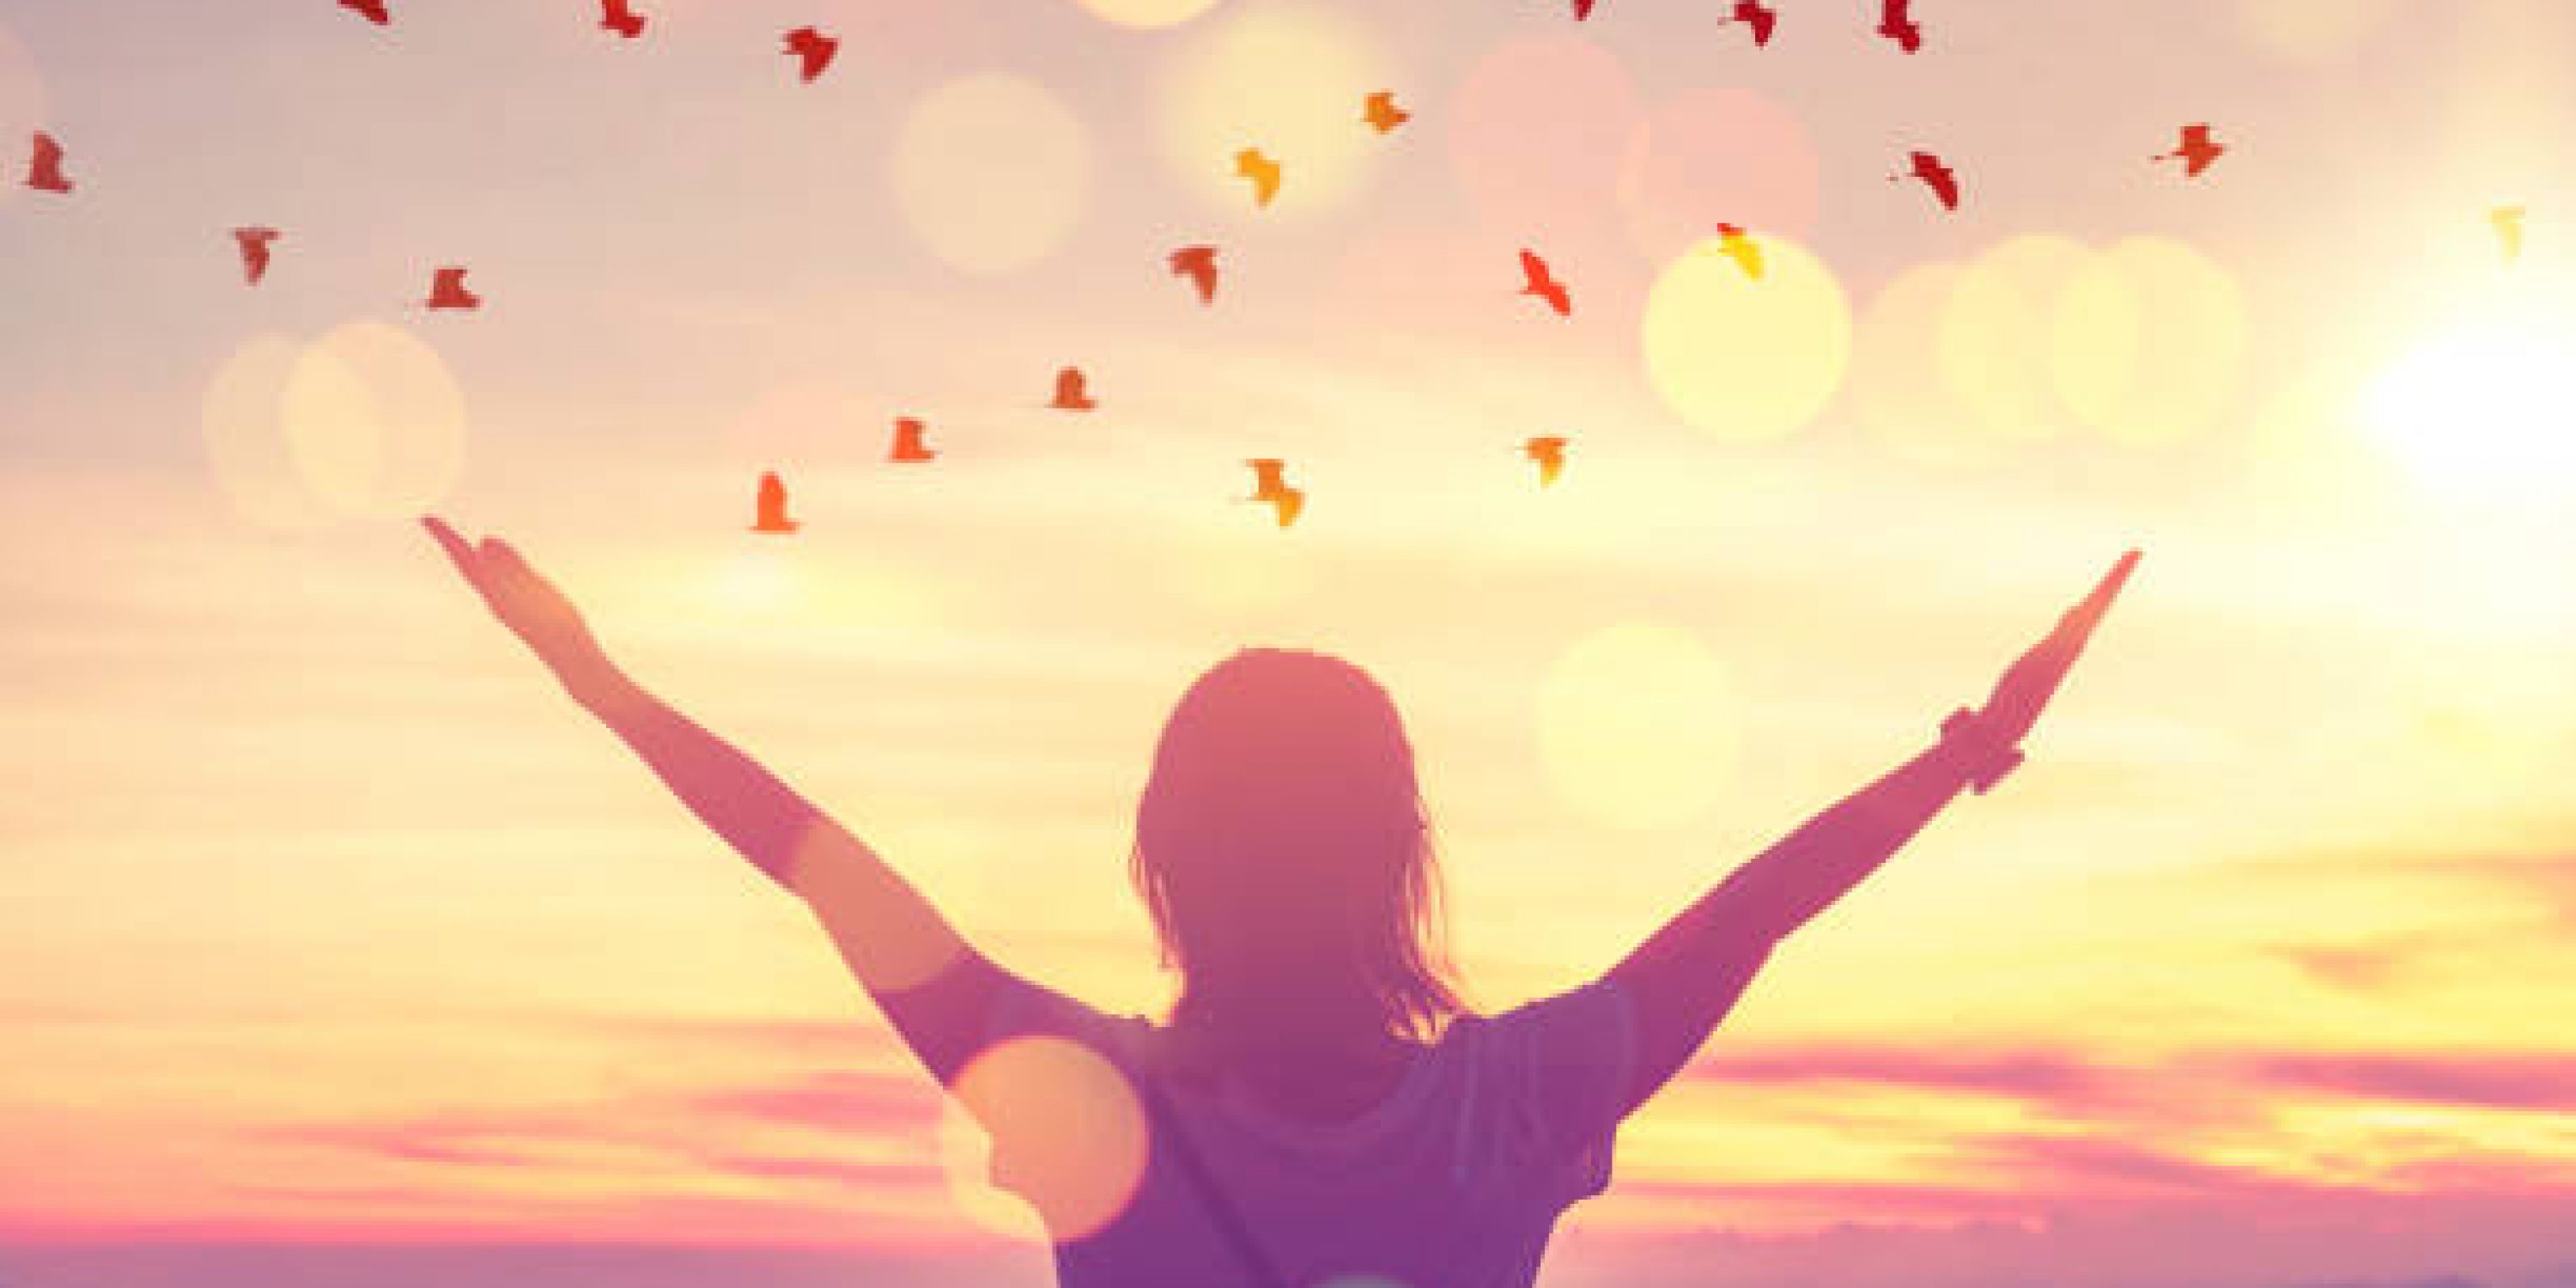 Freedom feel good and travel adventure concept. Copy space of silhouette woman rising hands on sunset sky at top of mountain and bird fly abstract background. Vintage tone filter effect color style.